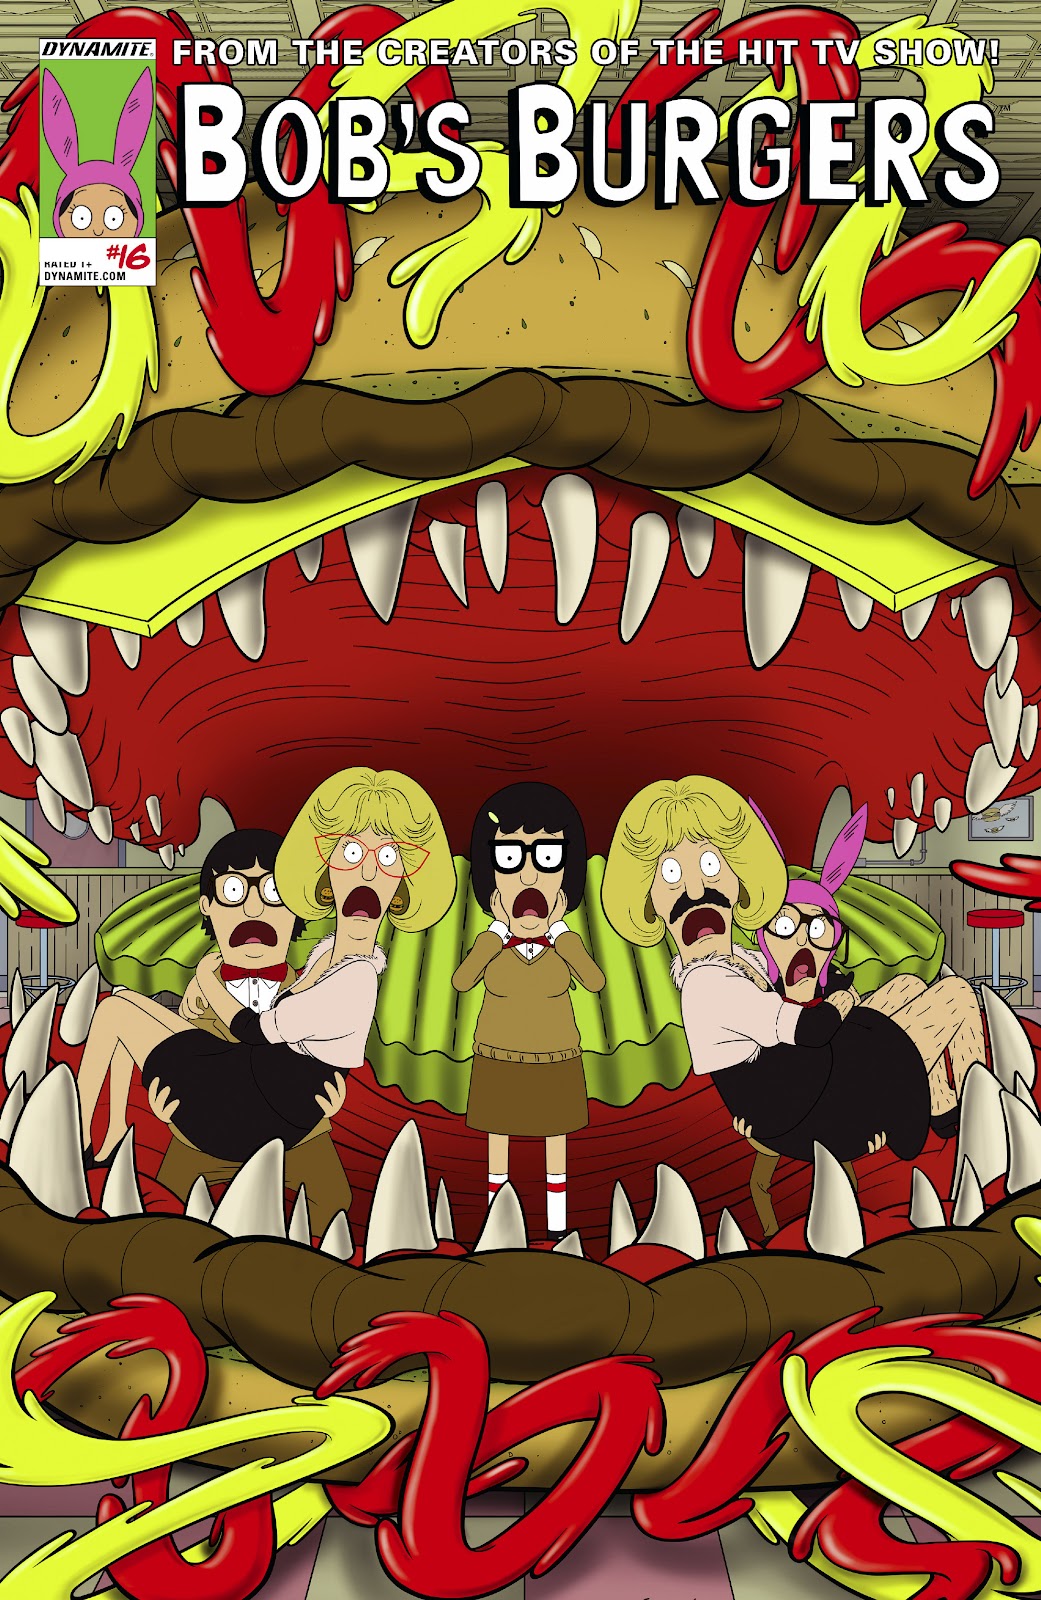 Bobs Burgers Digital Exclusive Edition 016 2016 | Read Bobs Burgers Digital  Exclusive Edition 016 2016 comic online in high quality. Read Full Comic  online for free - Read comics online in high quality .| READ COMIC ONLINE